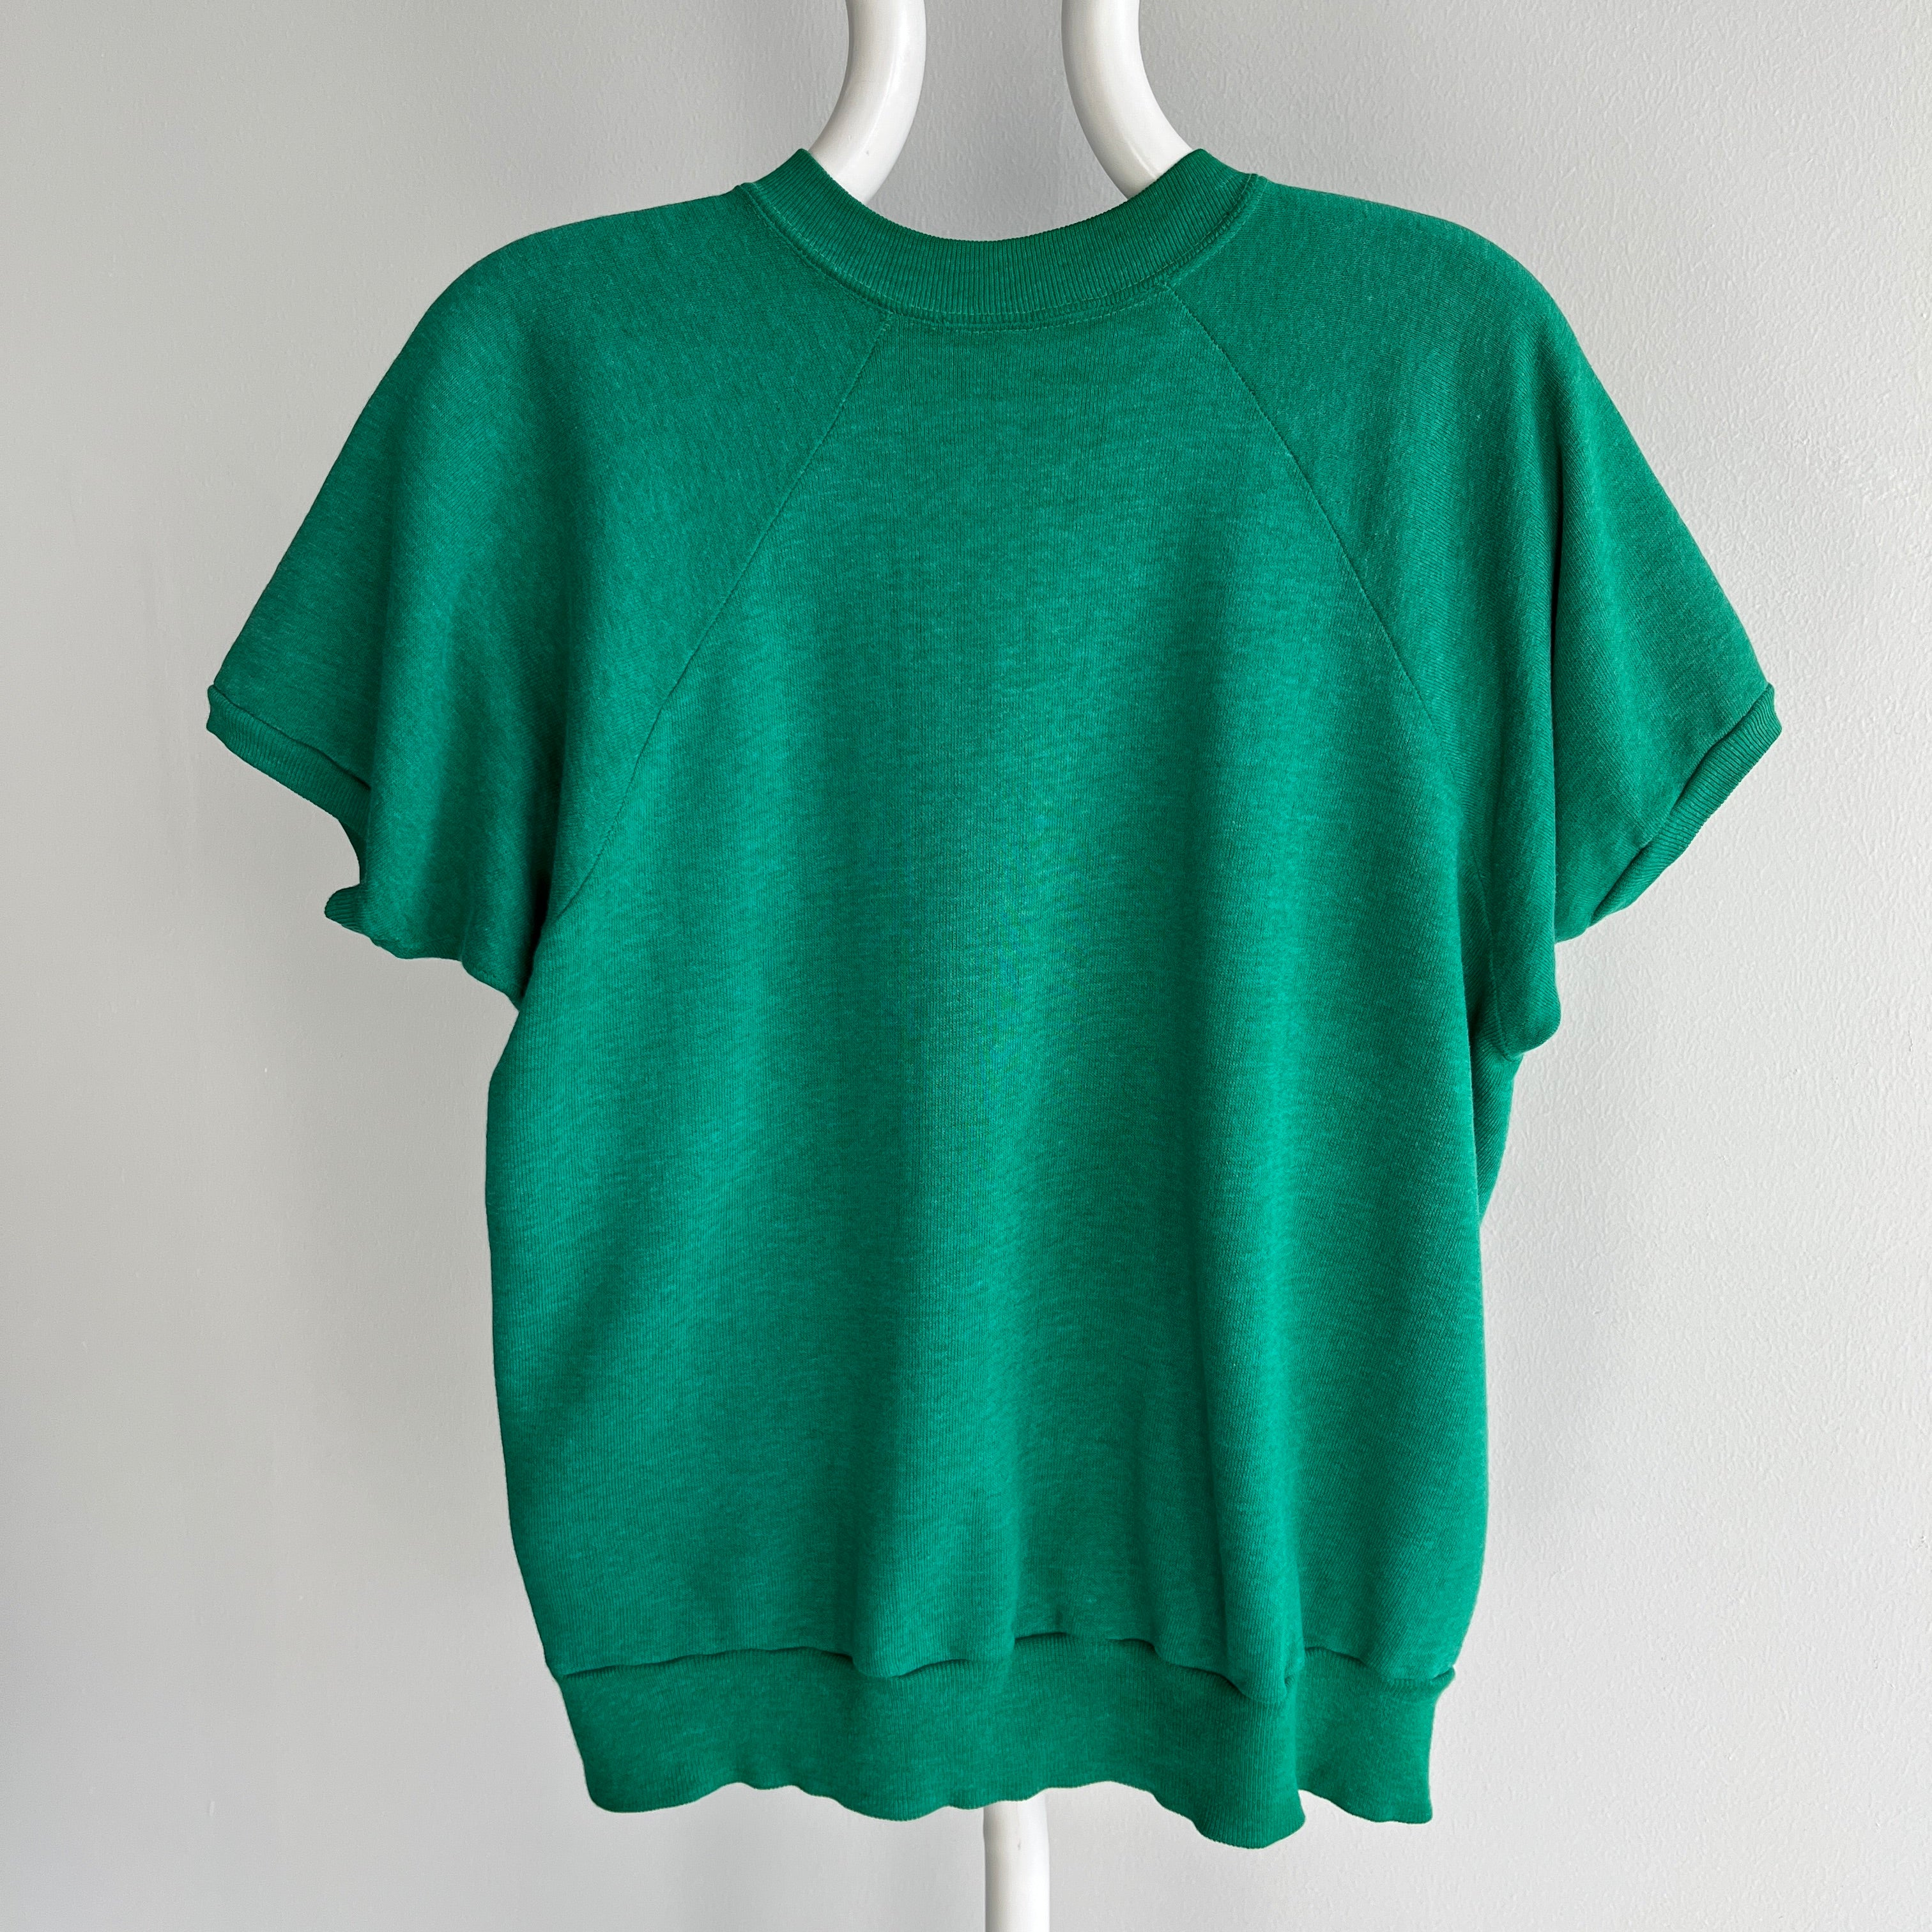 1970s Exceptionally Soft and Worn Faded Green Warm Up